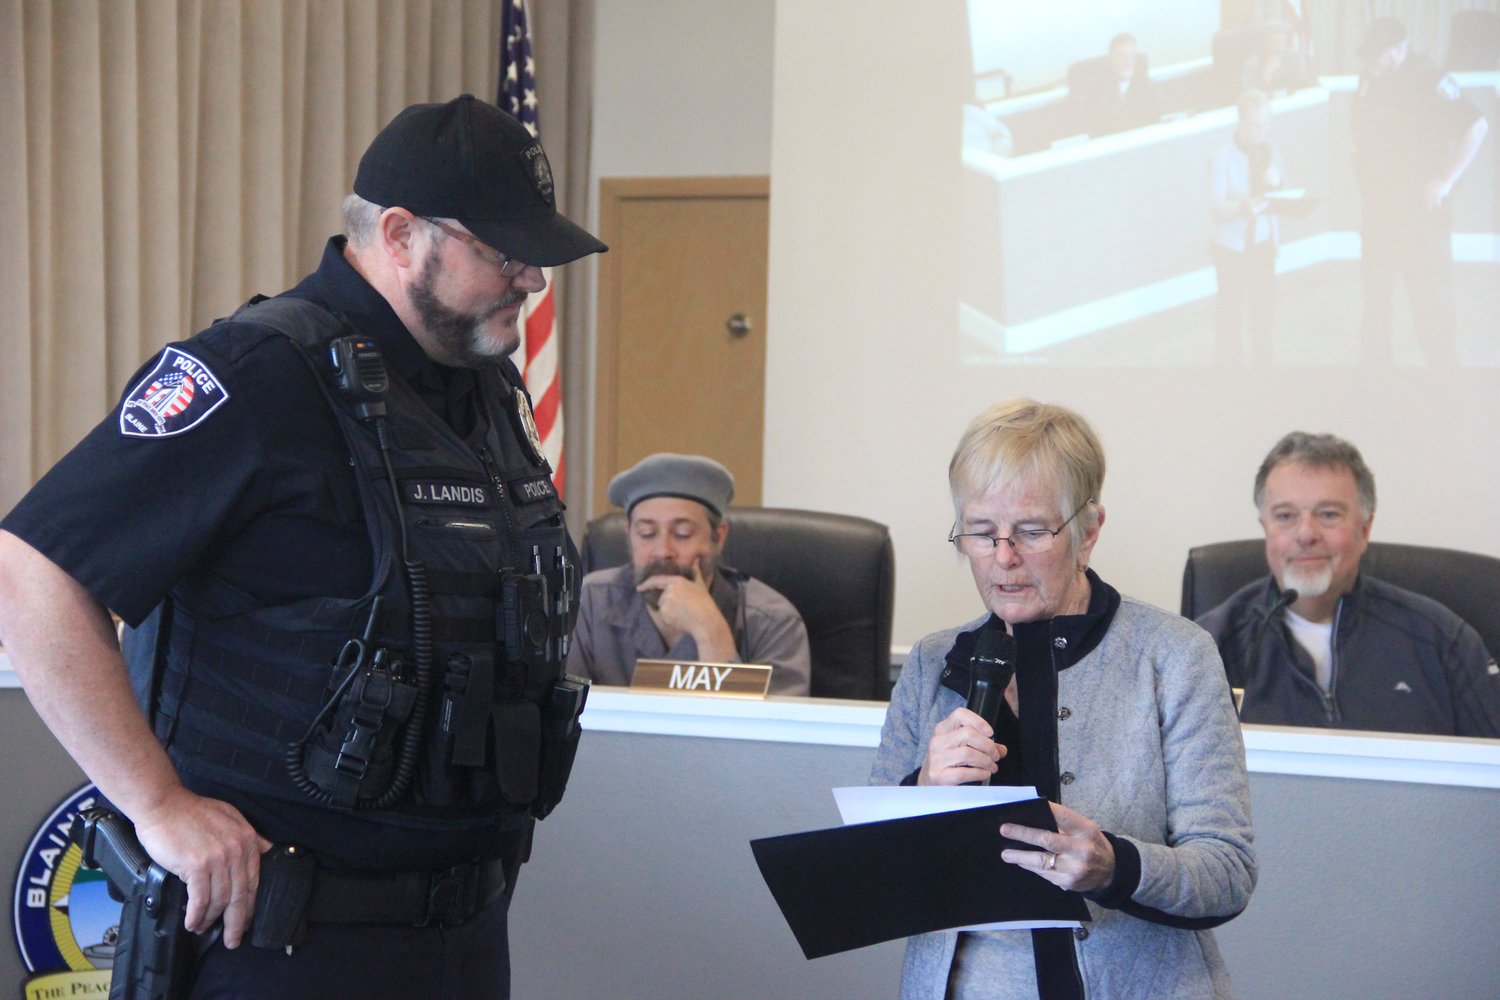 Mayor Mary Lou Steward presented Blaine Police Department officer Jon Landis with a certification of appreciation during the March 13 city council meeting. The recognition came ahead of Landis’ retirement on Friday, March 31. Since 1995, Landis has served many capacities in the police department, including school resource officer, traffic safety officer, child abuse investigator and field training officer.